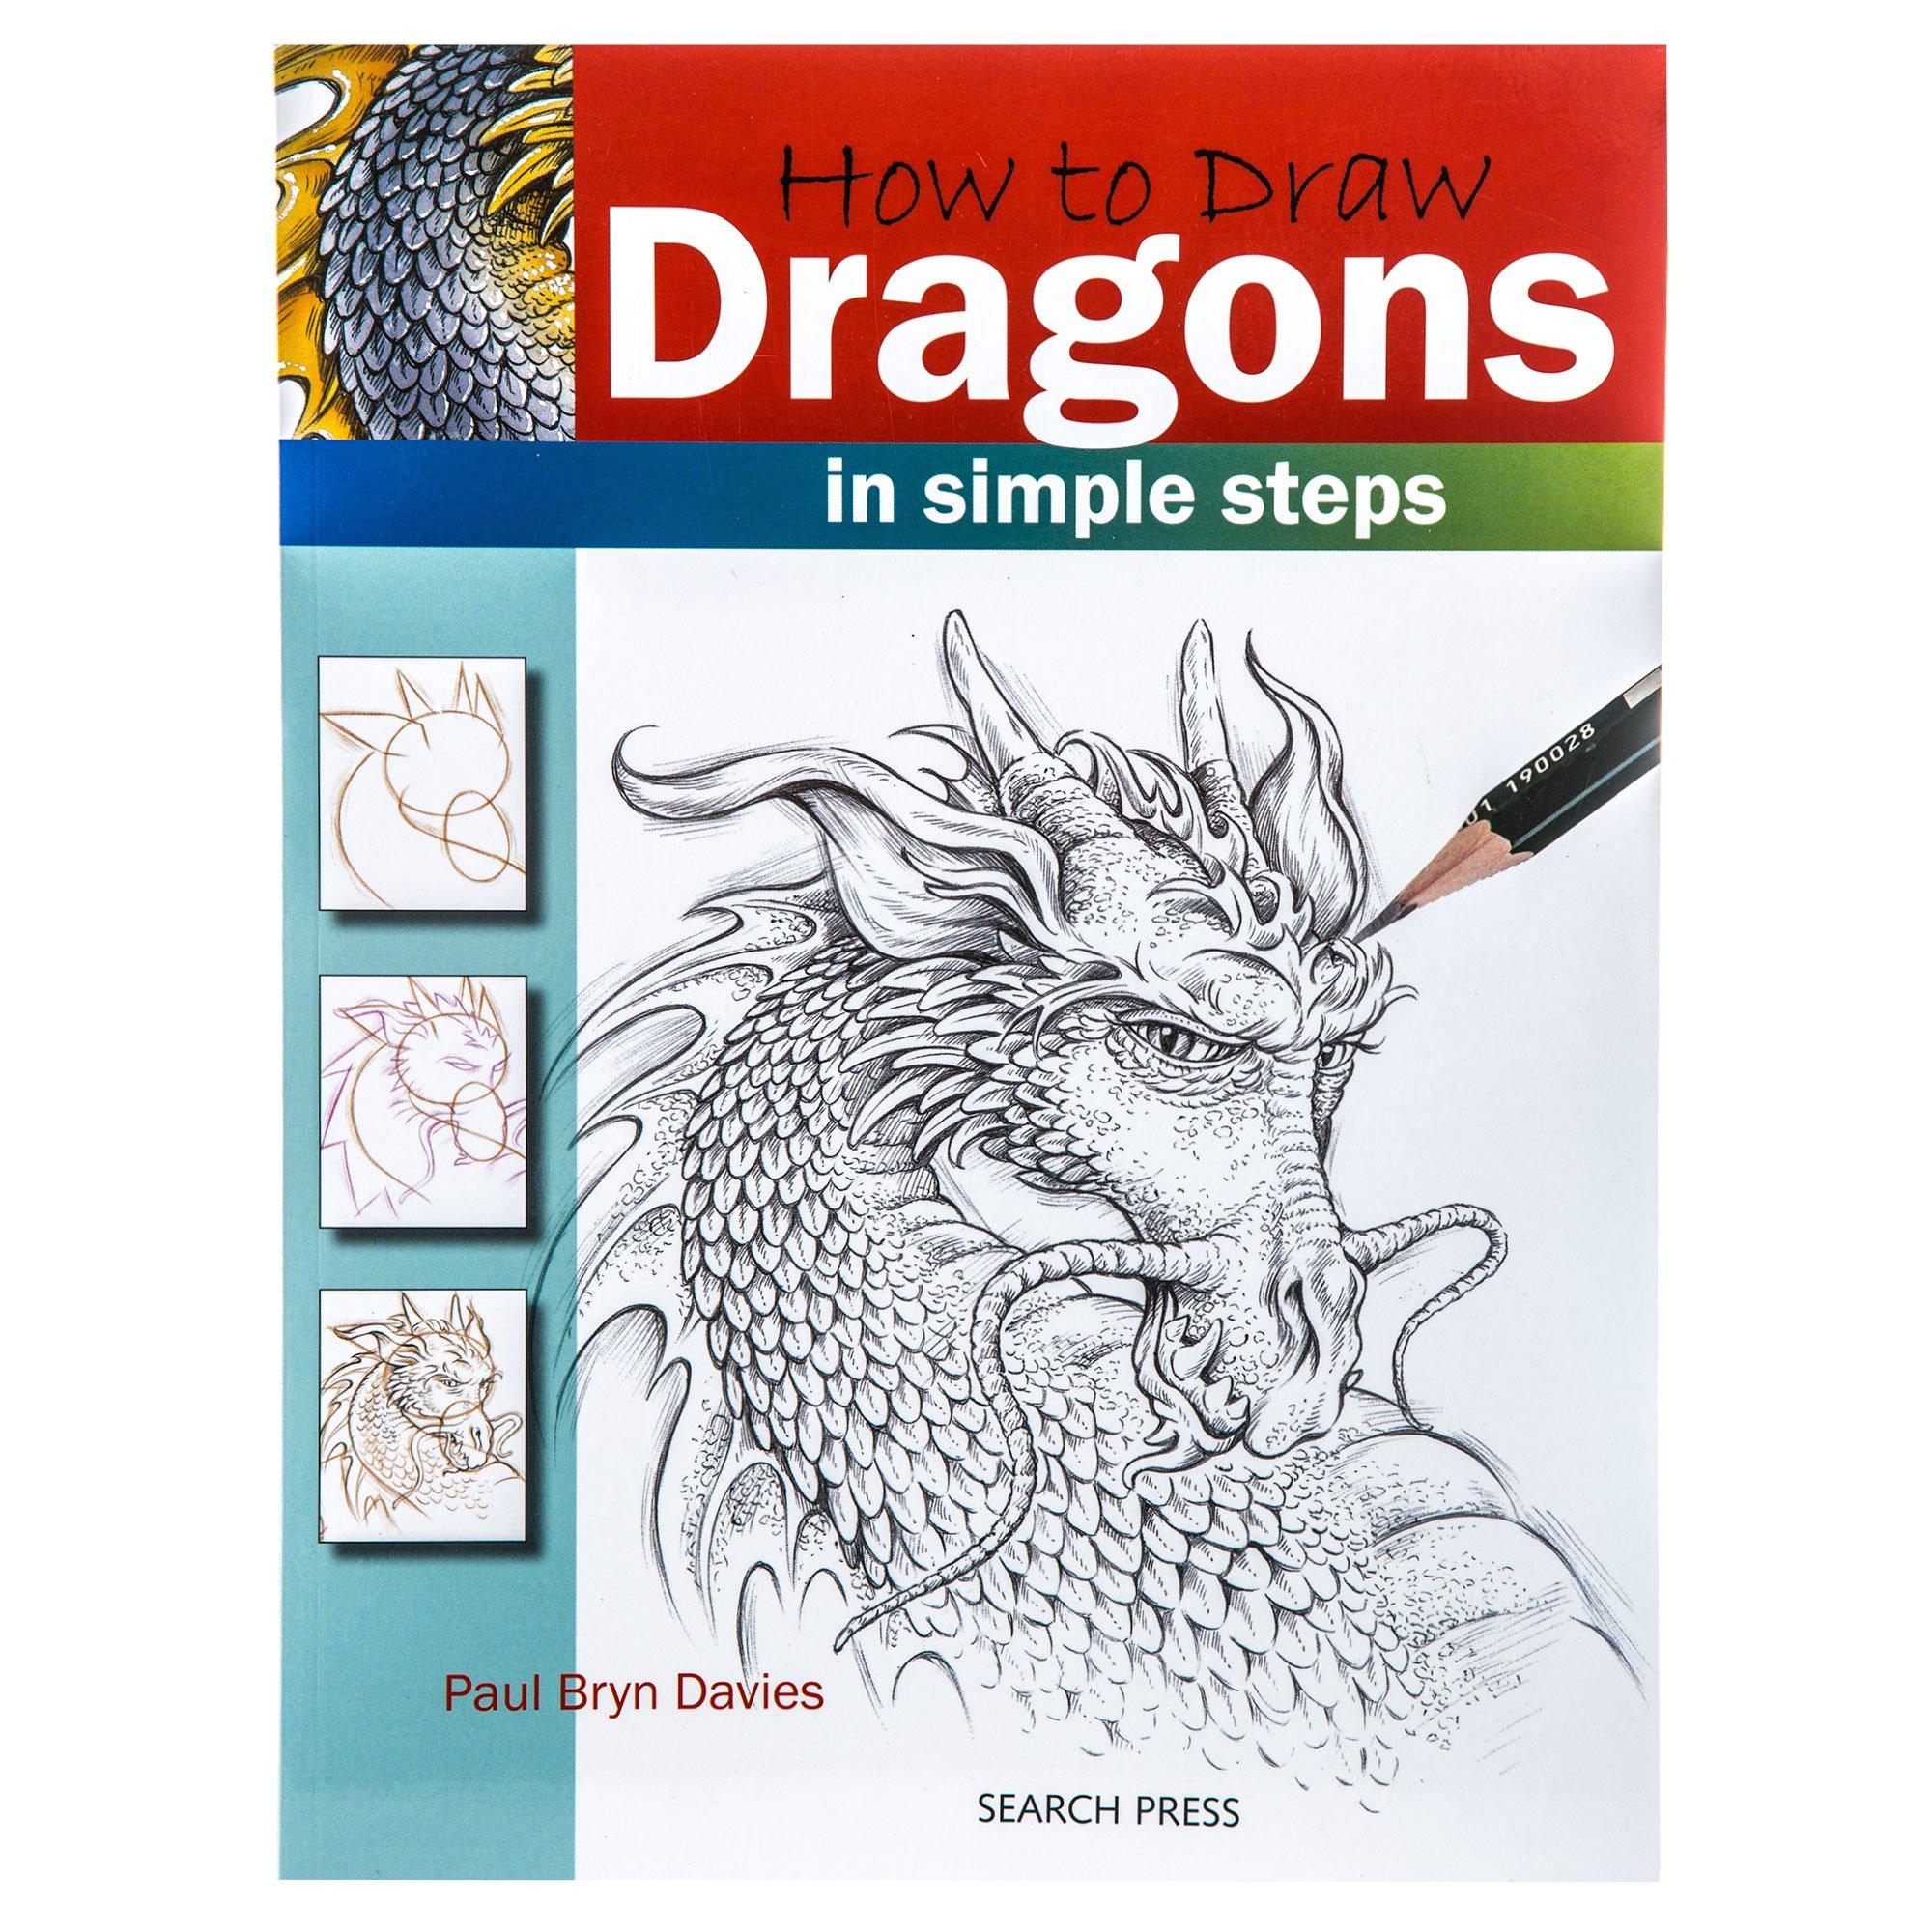 How to Draw a Dragon (Dragons) Step by Step